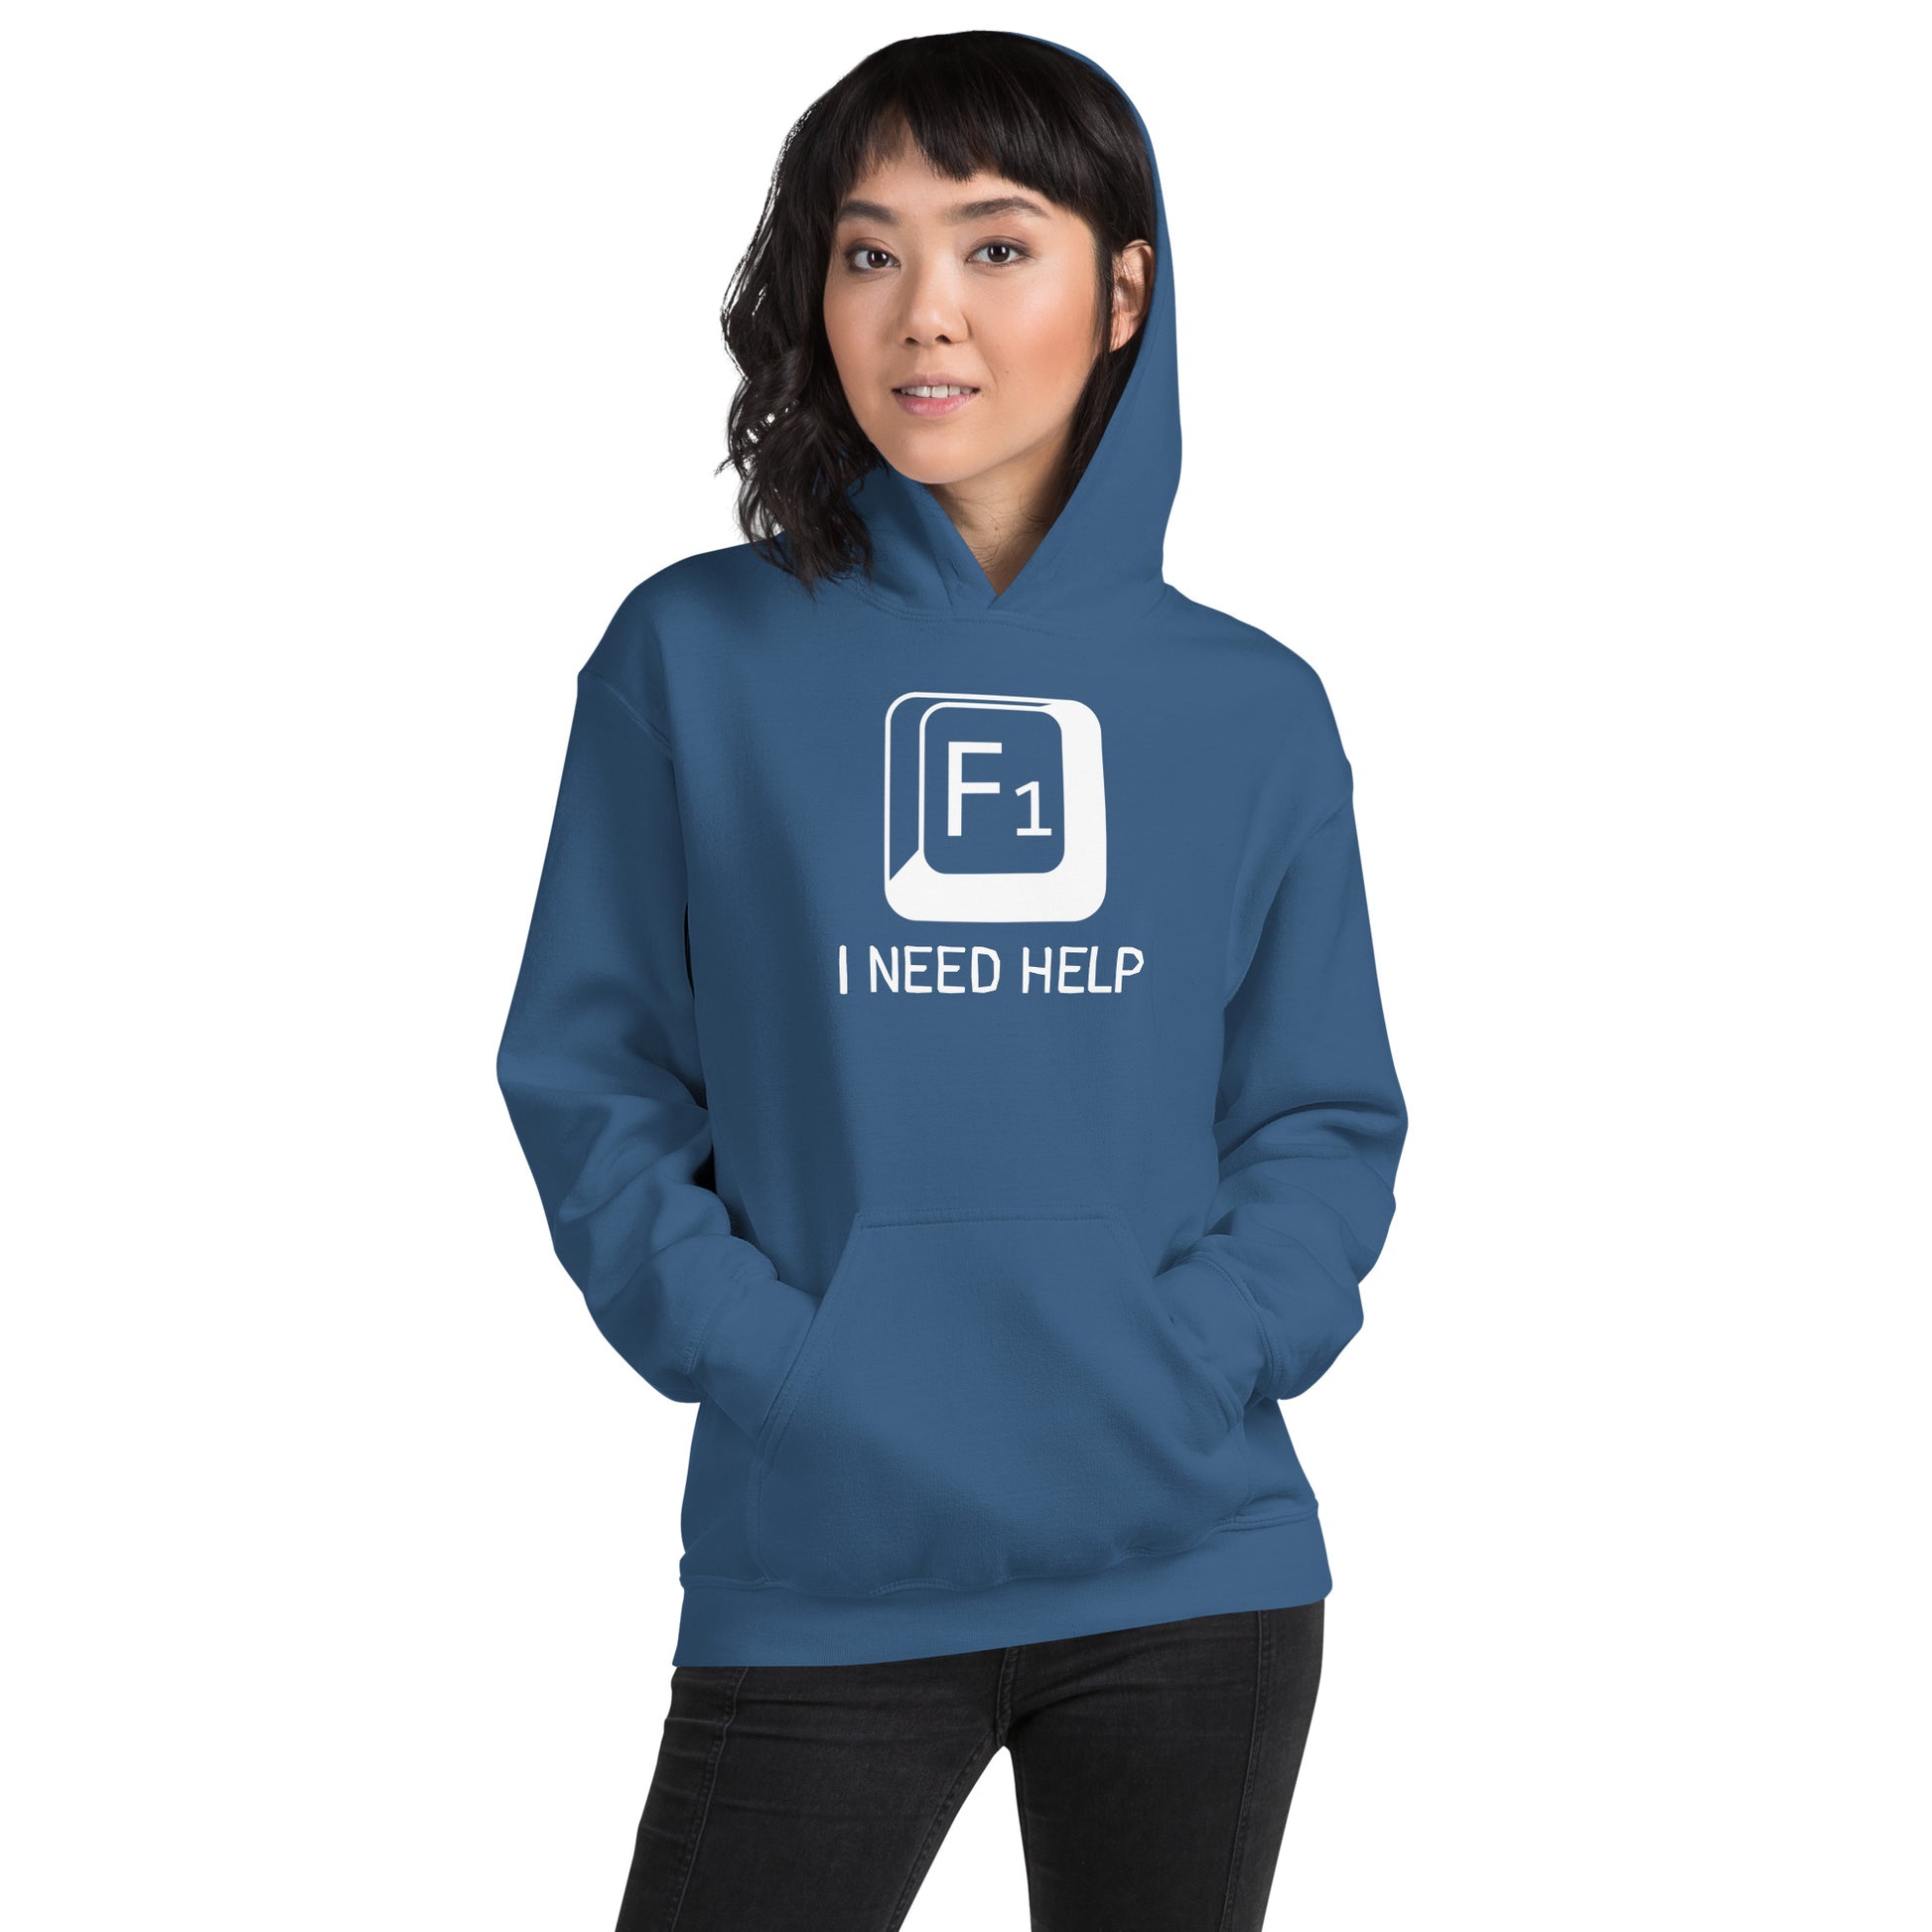 Women with indigo blue hoodie and a picture of F1 key with text "I need help"